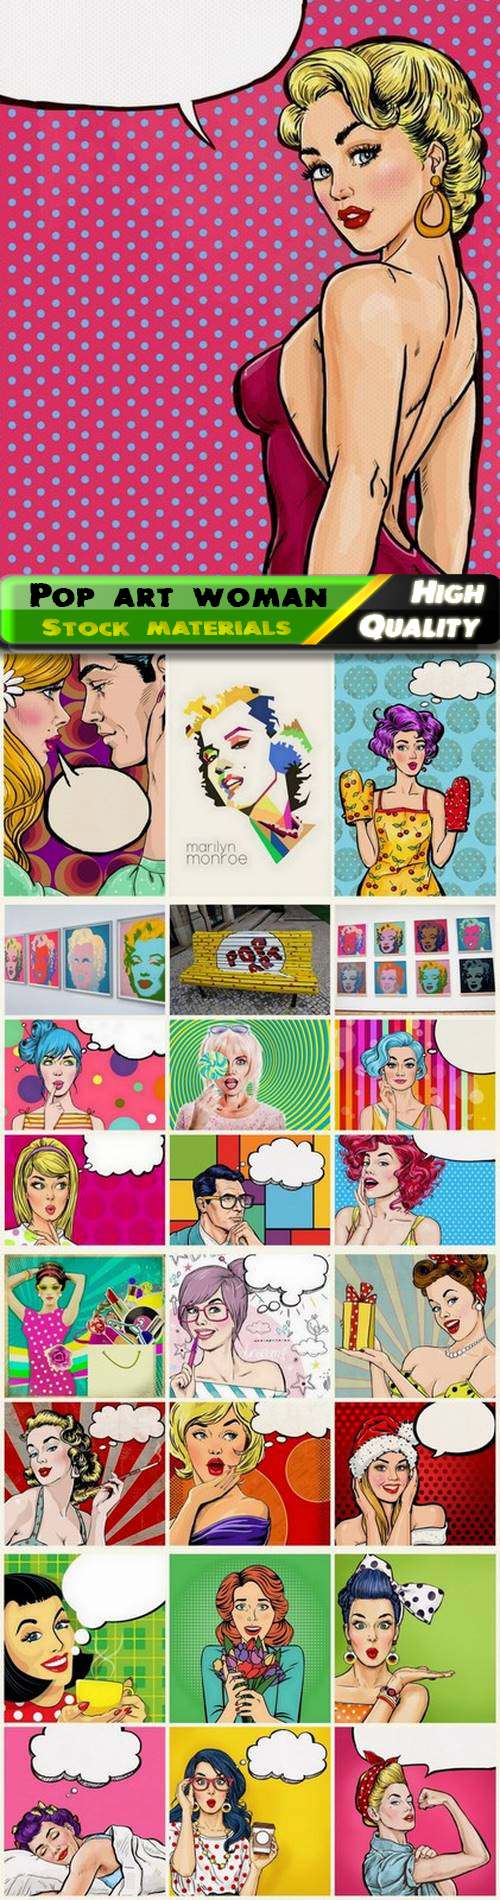 Pop art retro comic woman and girl with bubble for text - 25 HQ Jpg